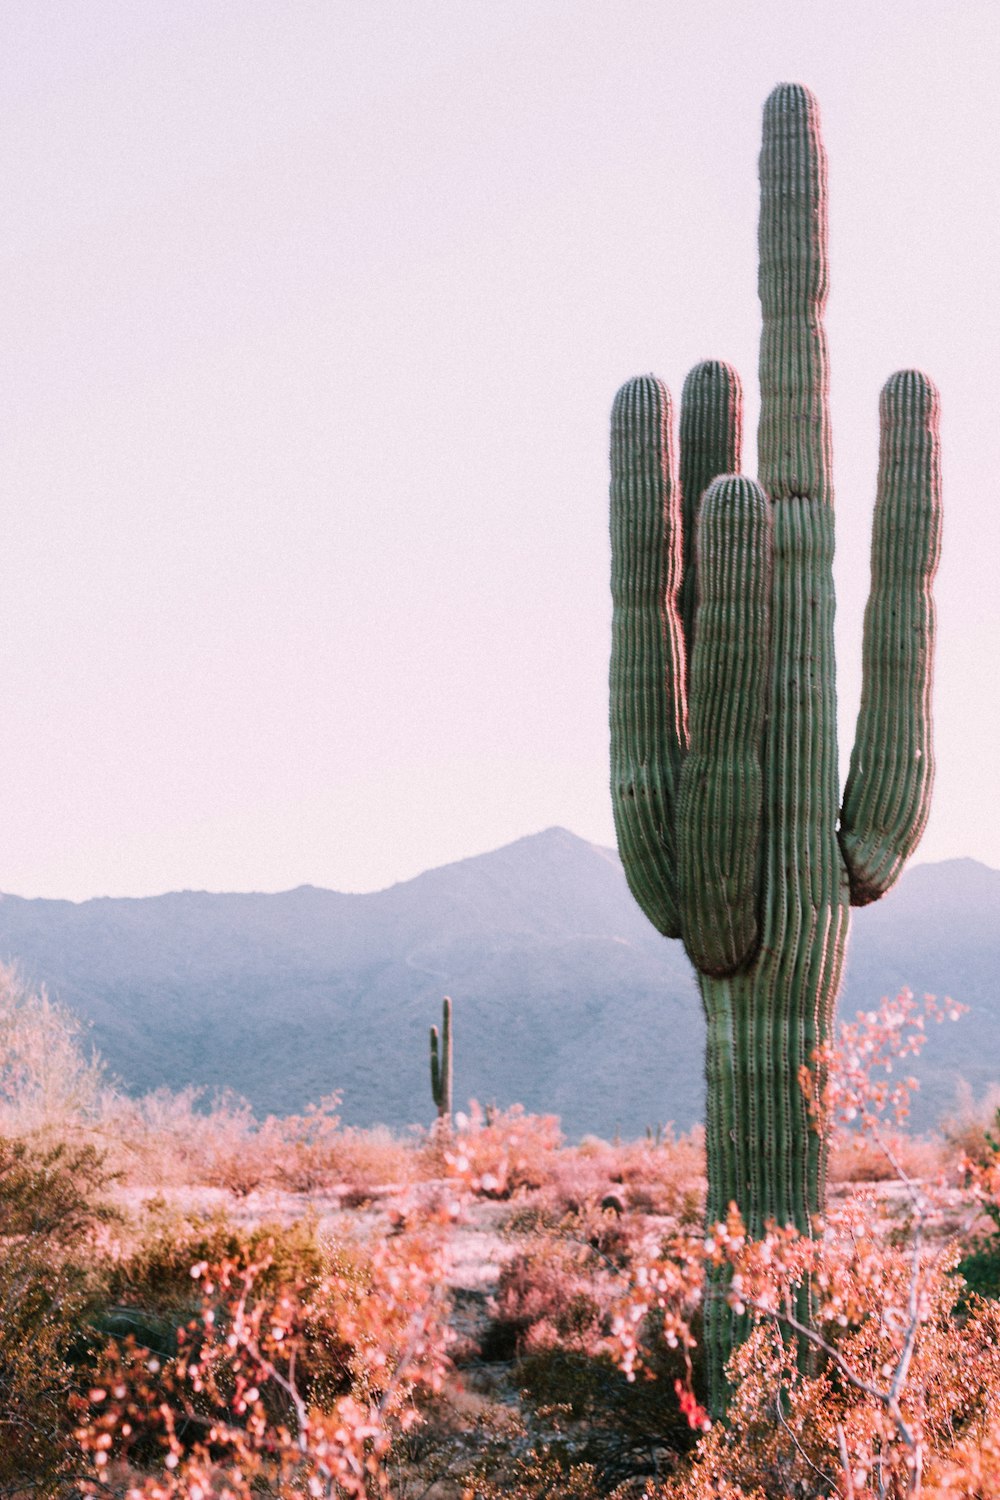 550+ Cactus Pictures | Download Free Images on Unsplash